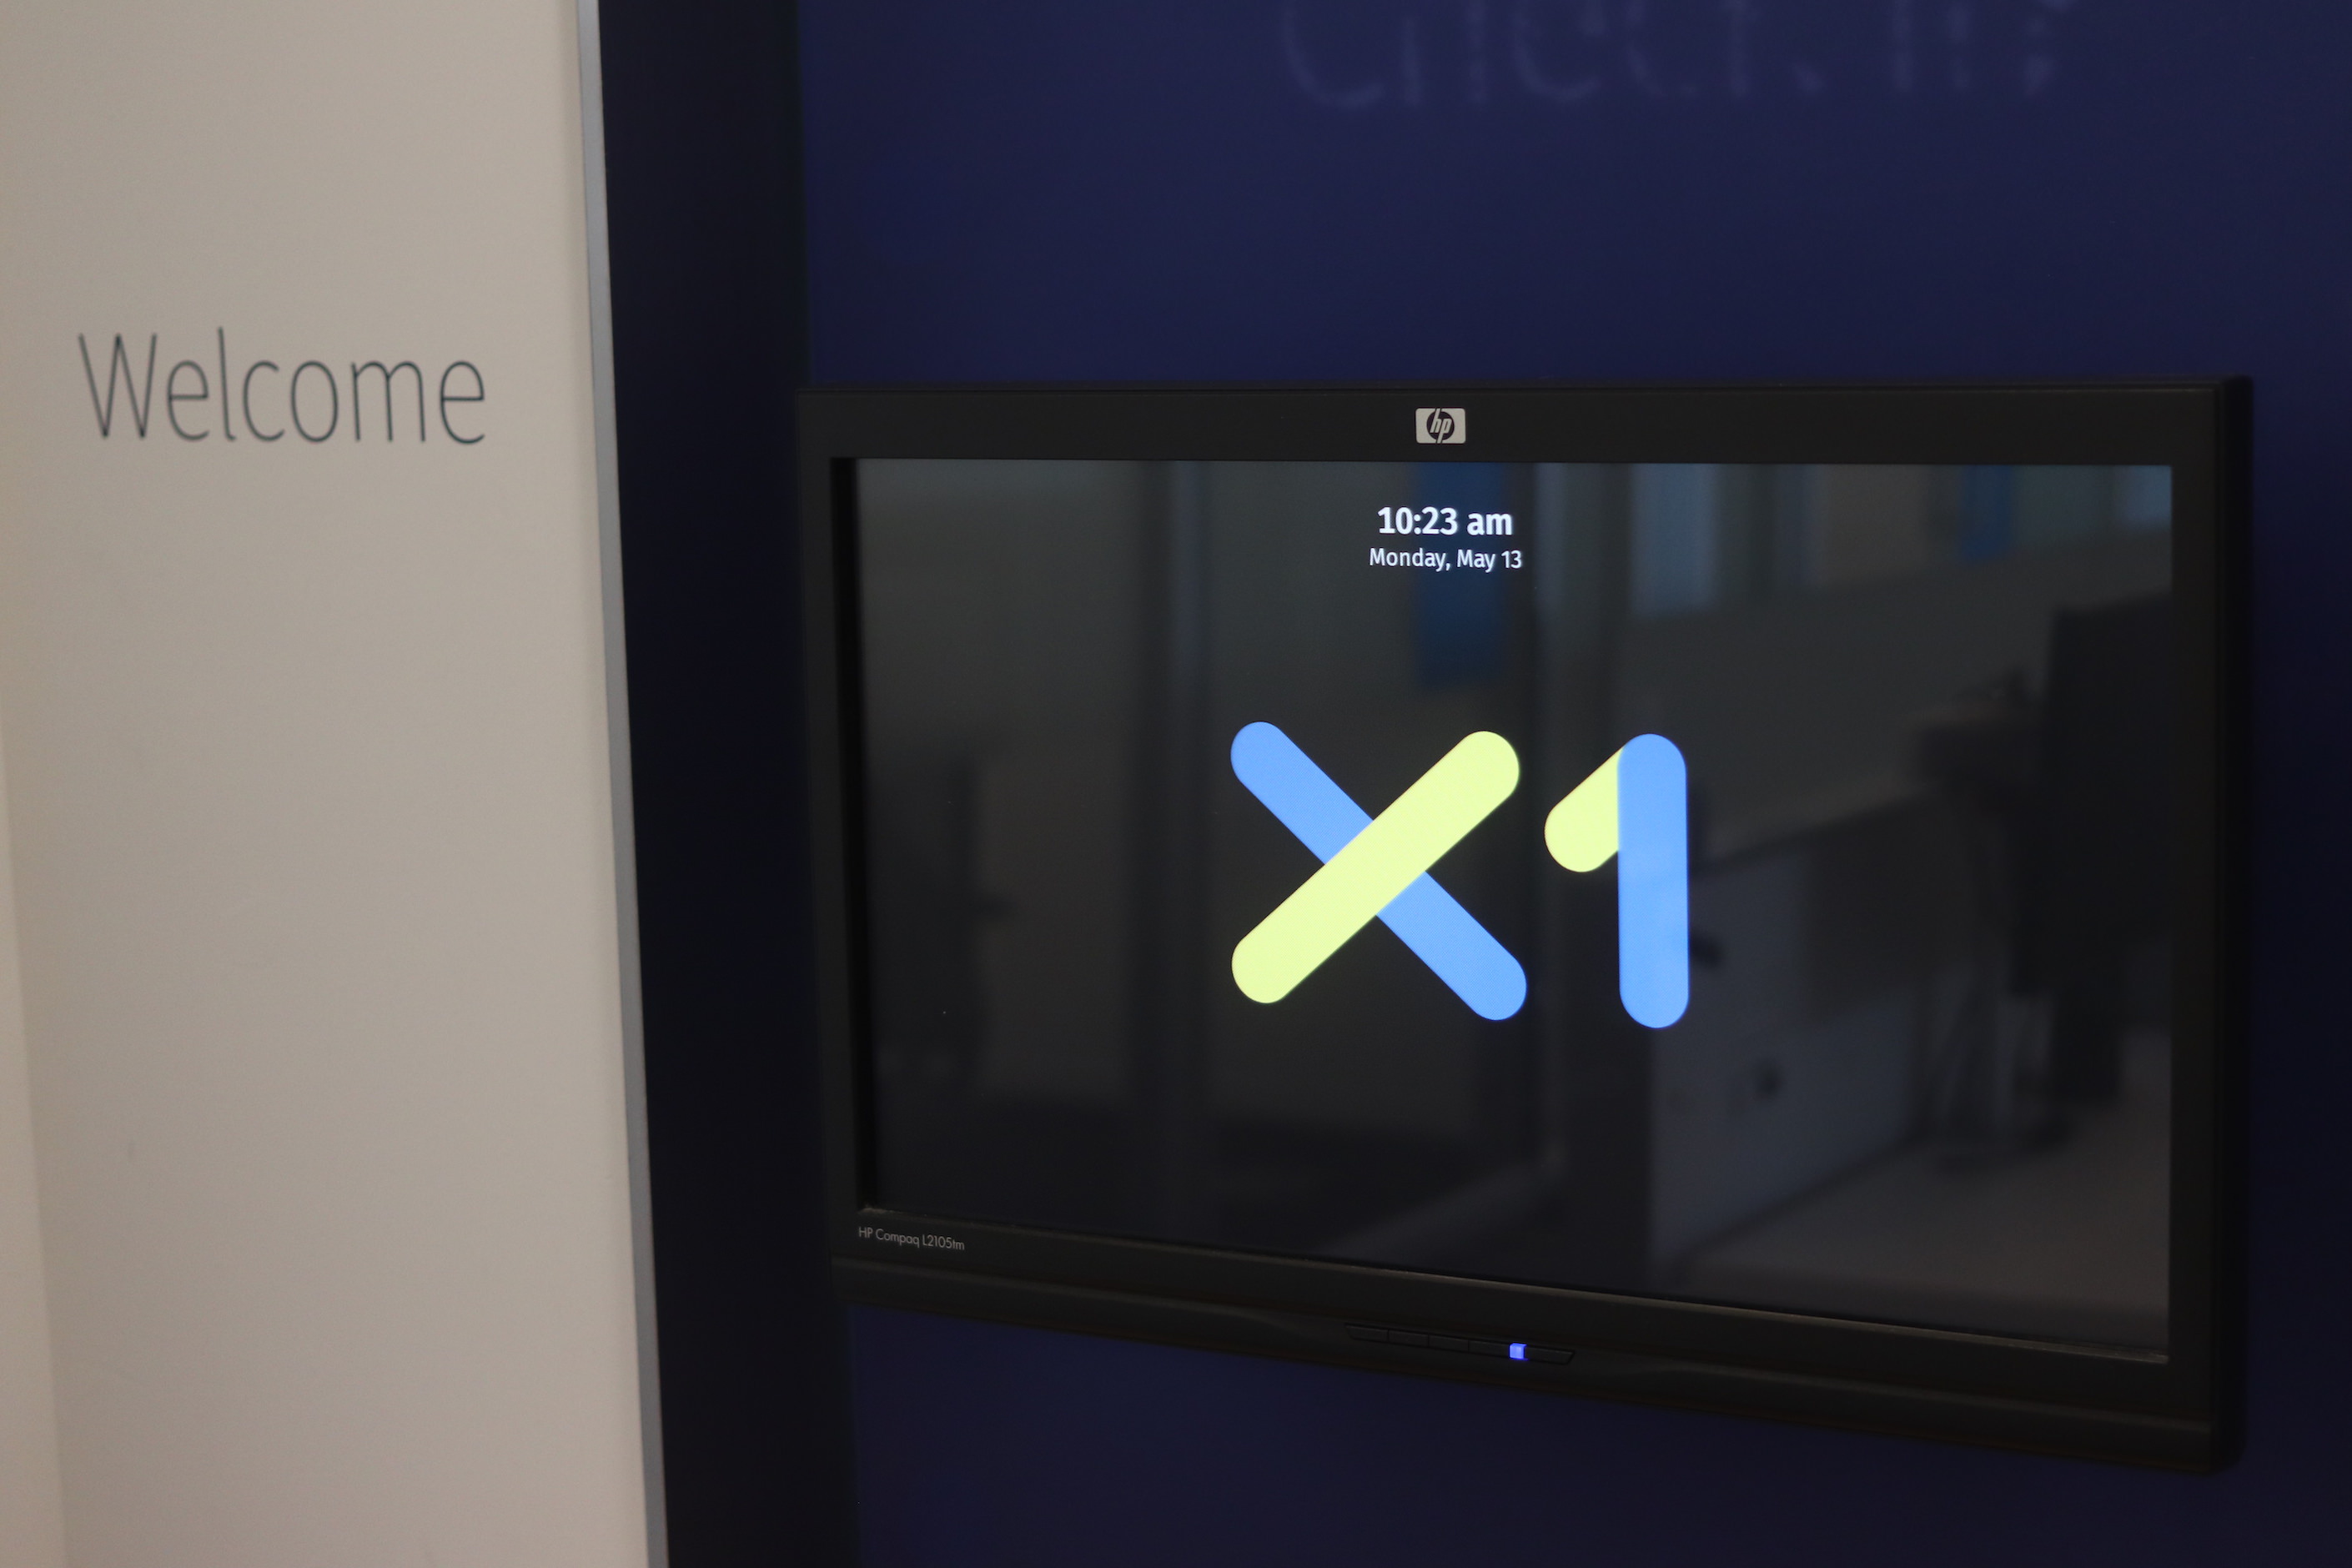 The display showing the date, time, and the X1 logo.